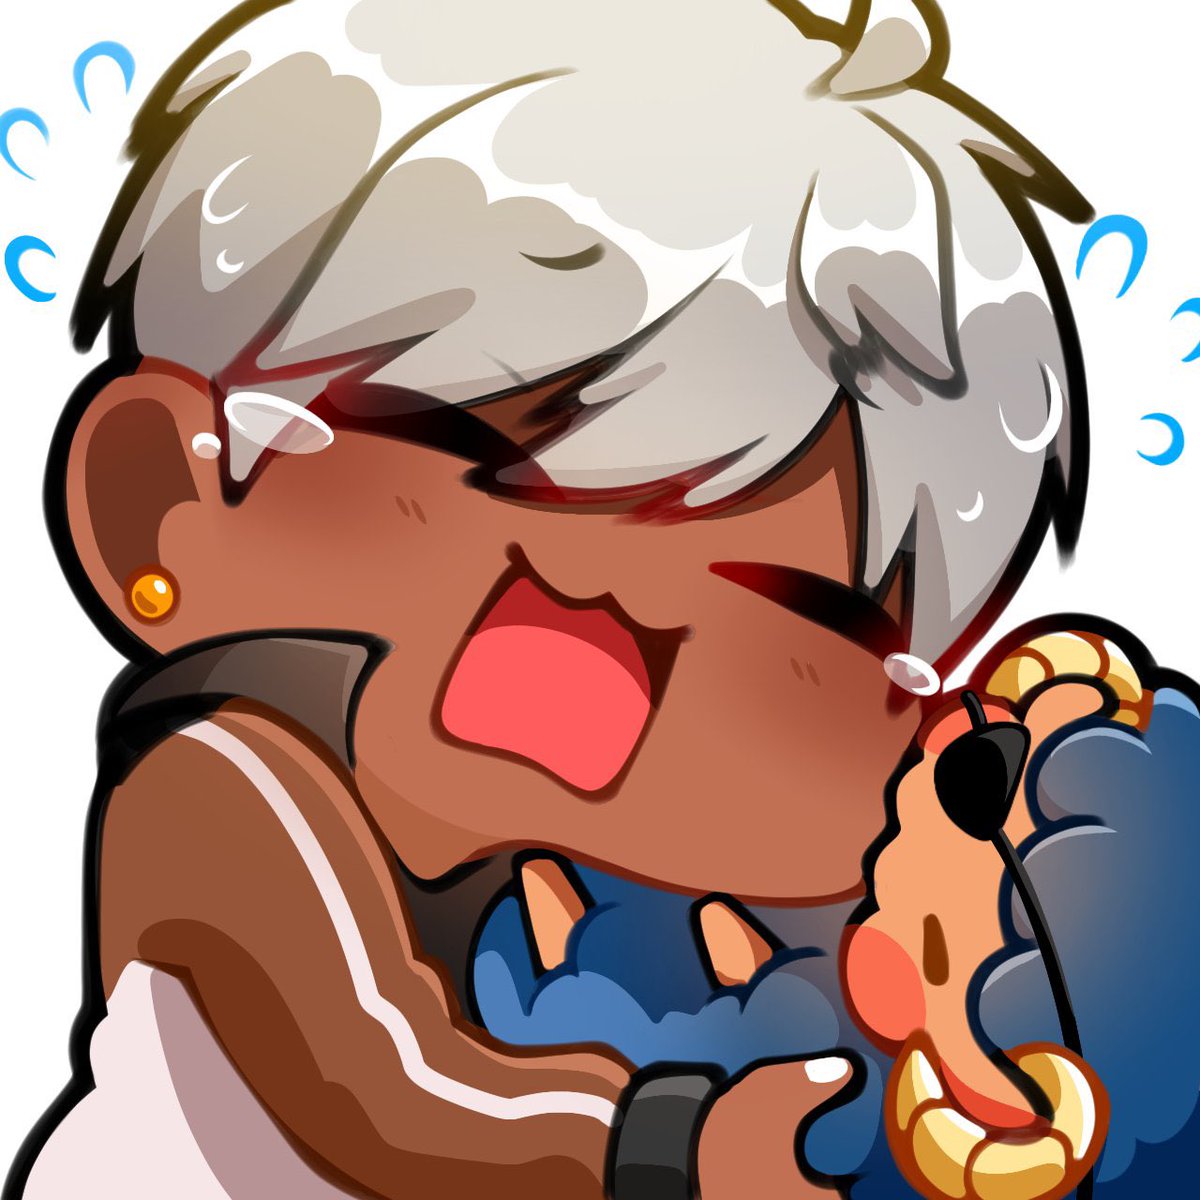 Mariposa is nomming on Mammon’s  cheeks cause he took her snacks 💛💛

Artist by: @/7hp3JazzyBoi 
#obeymemc #obeymemammon #obeyme